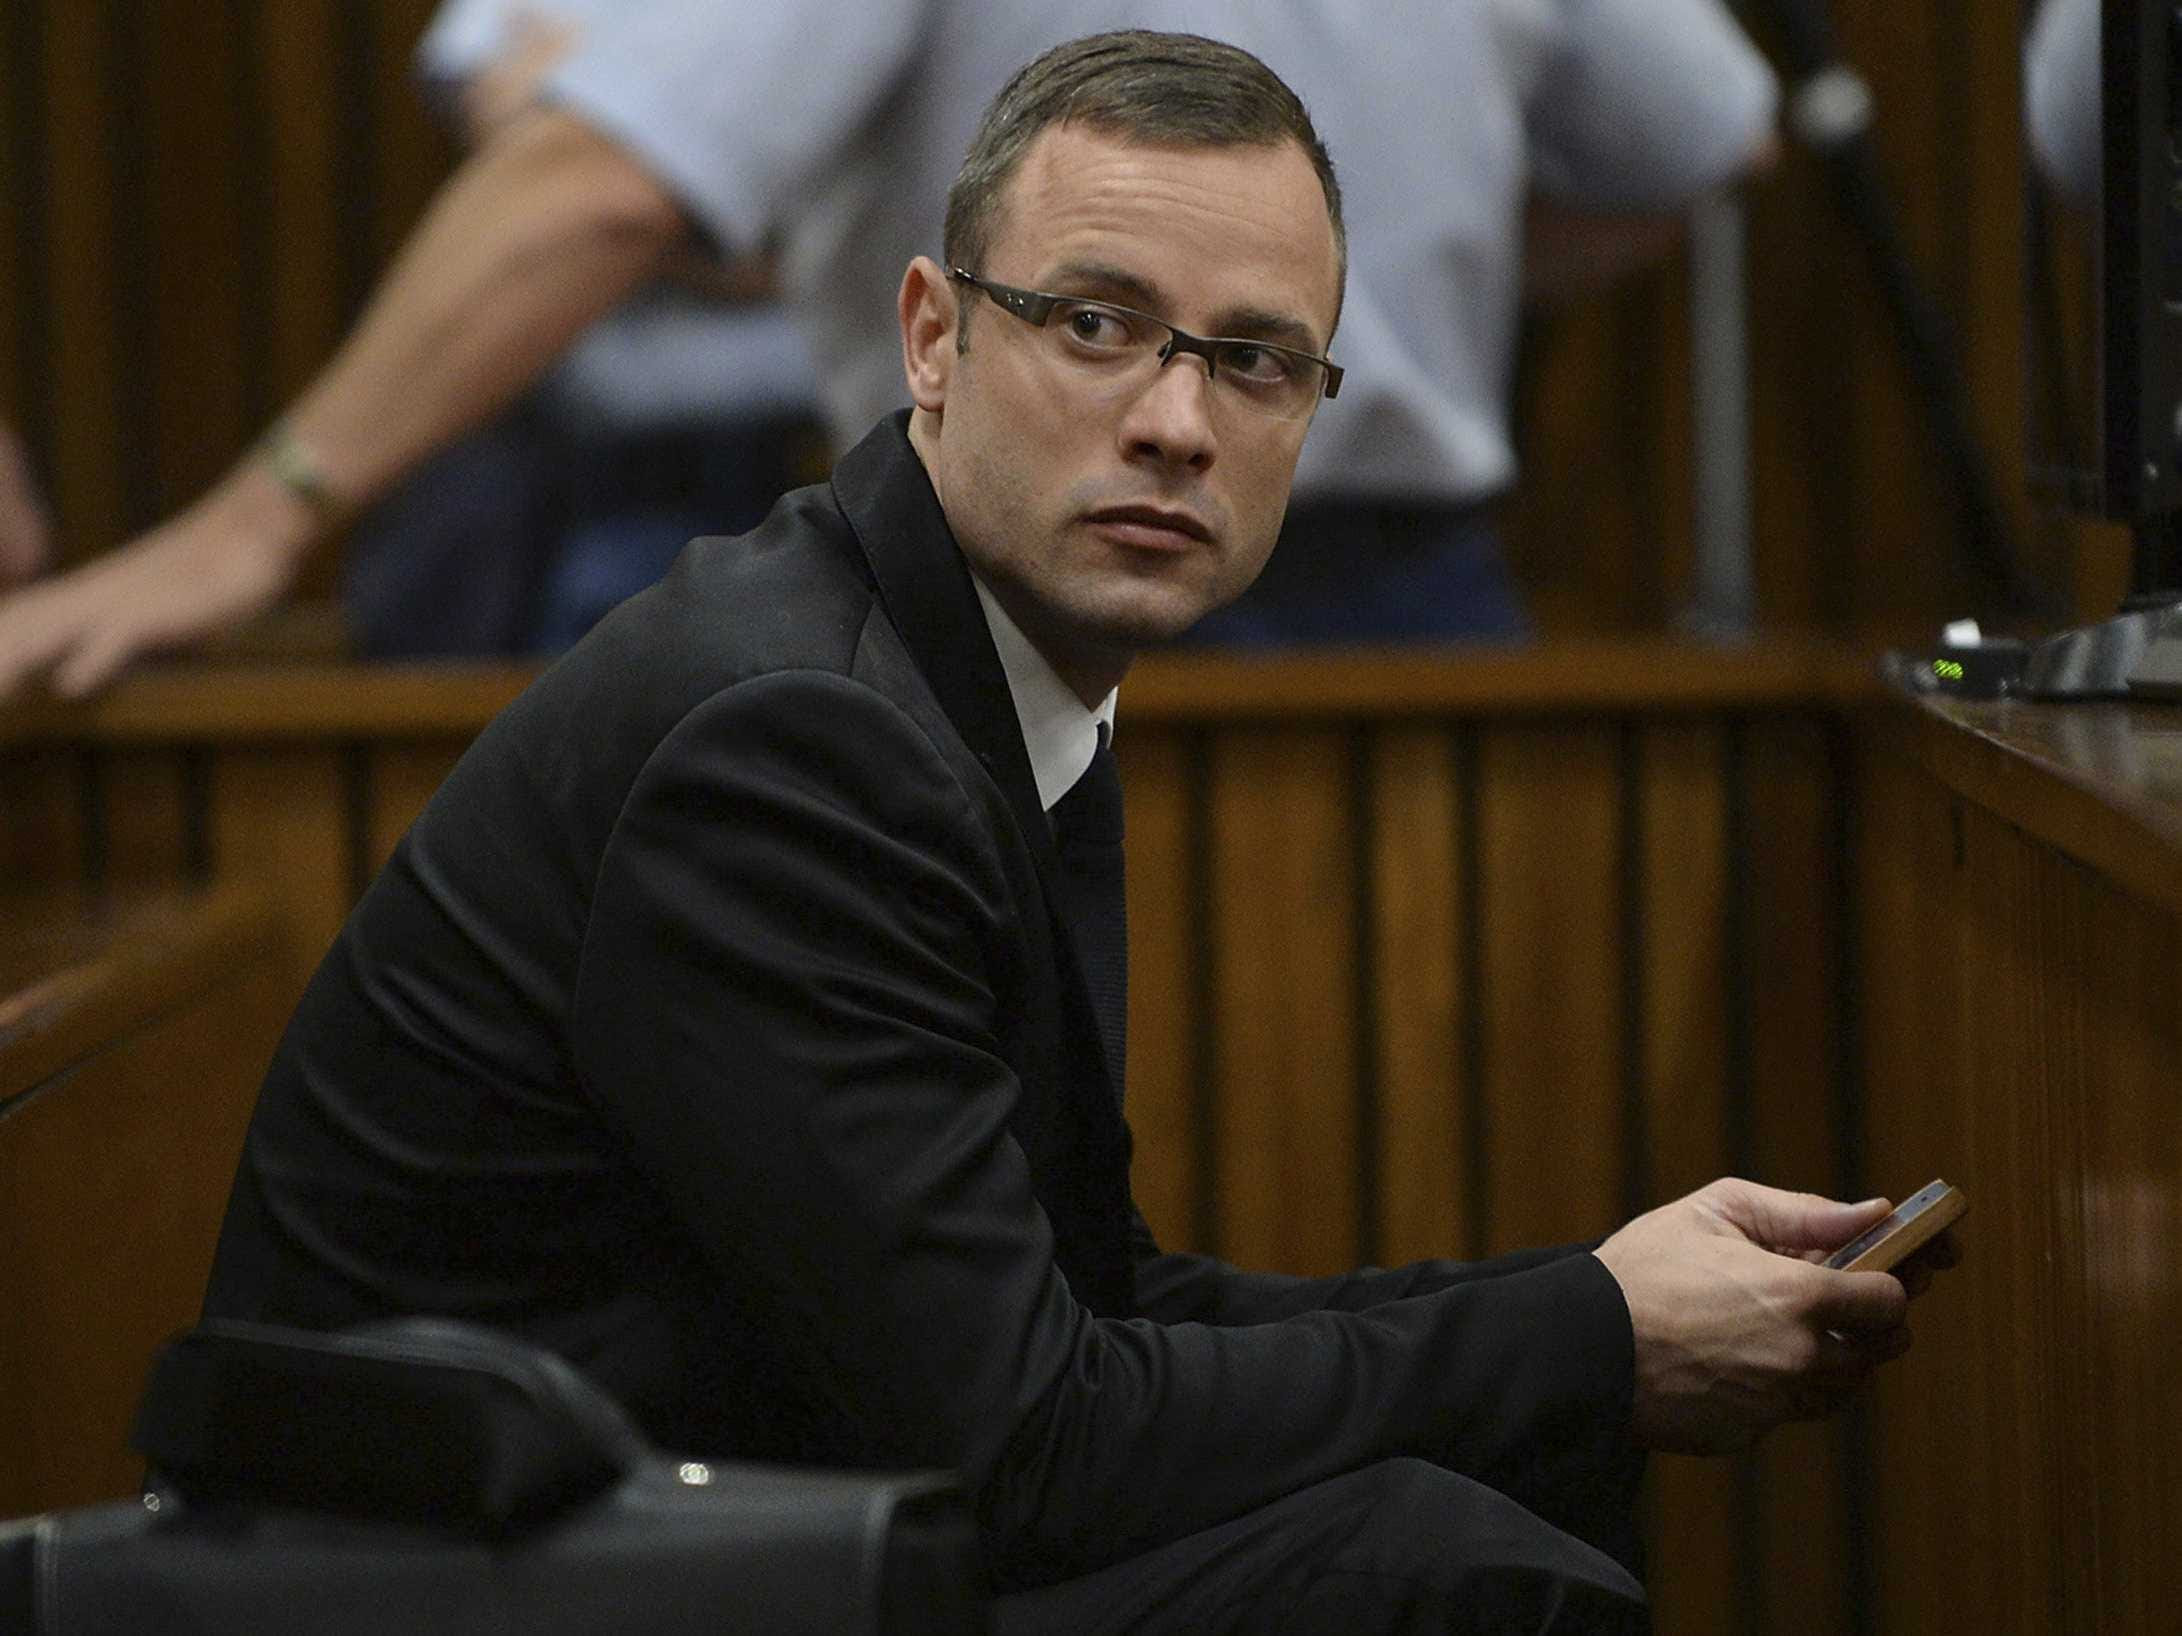 Oscar Pistorius Just Got Convicted Of Culpable Homicide — Here's What That Means